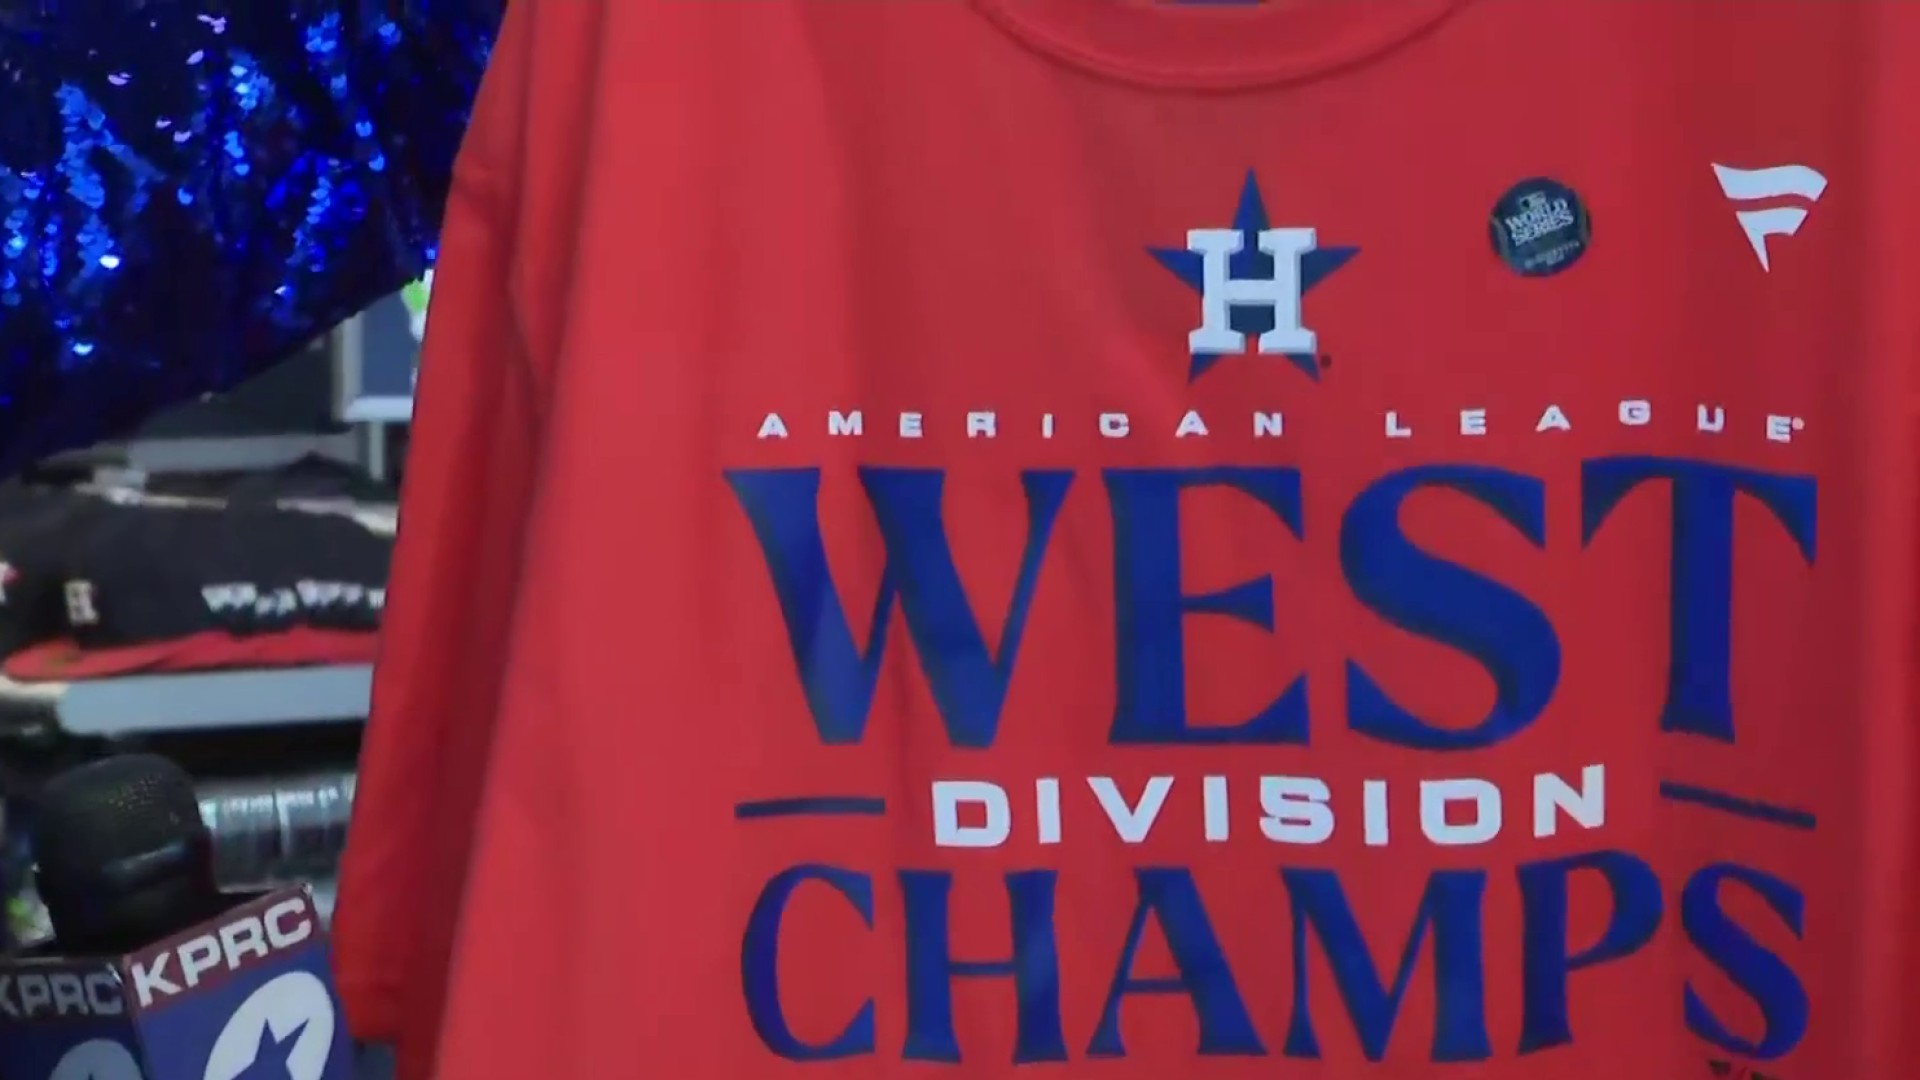 Astros win AL West; KPRC 2 at the fan store with merch